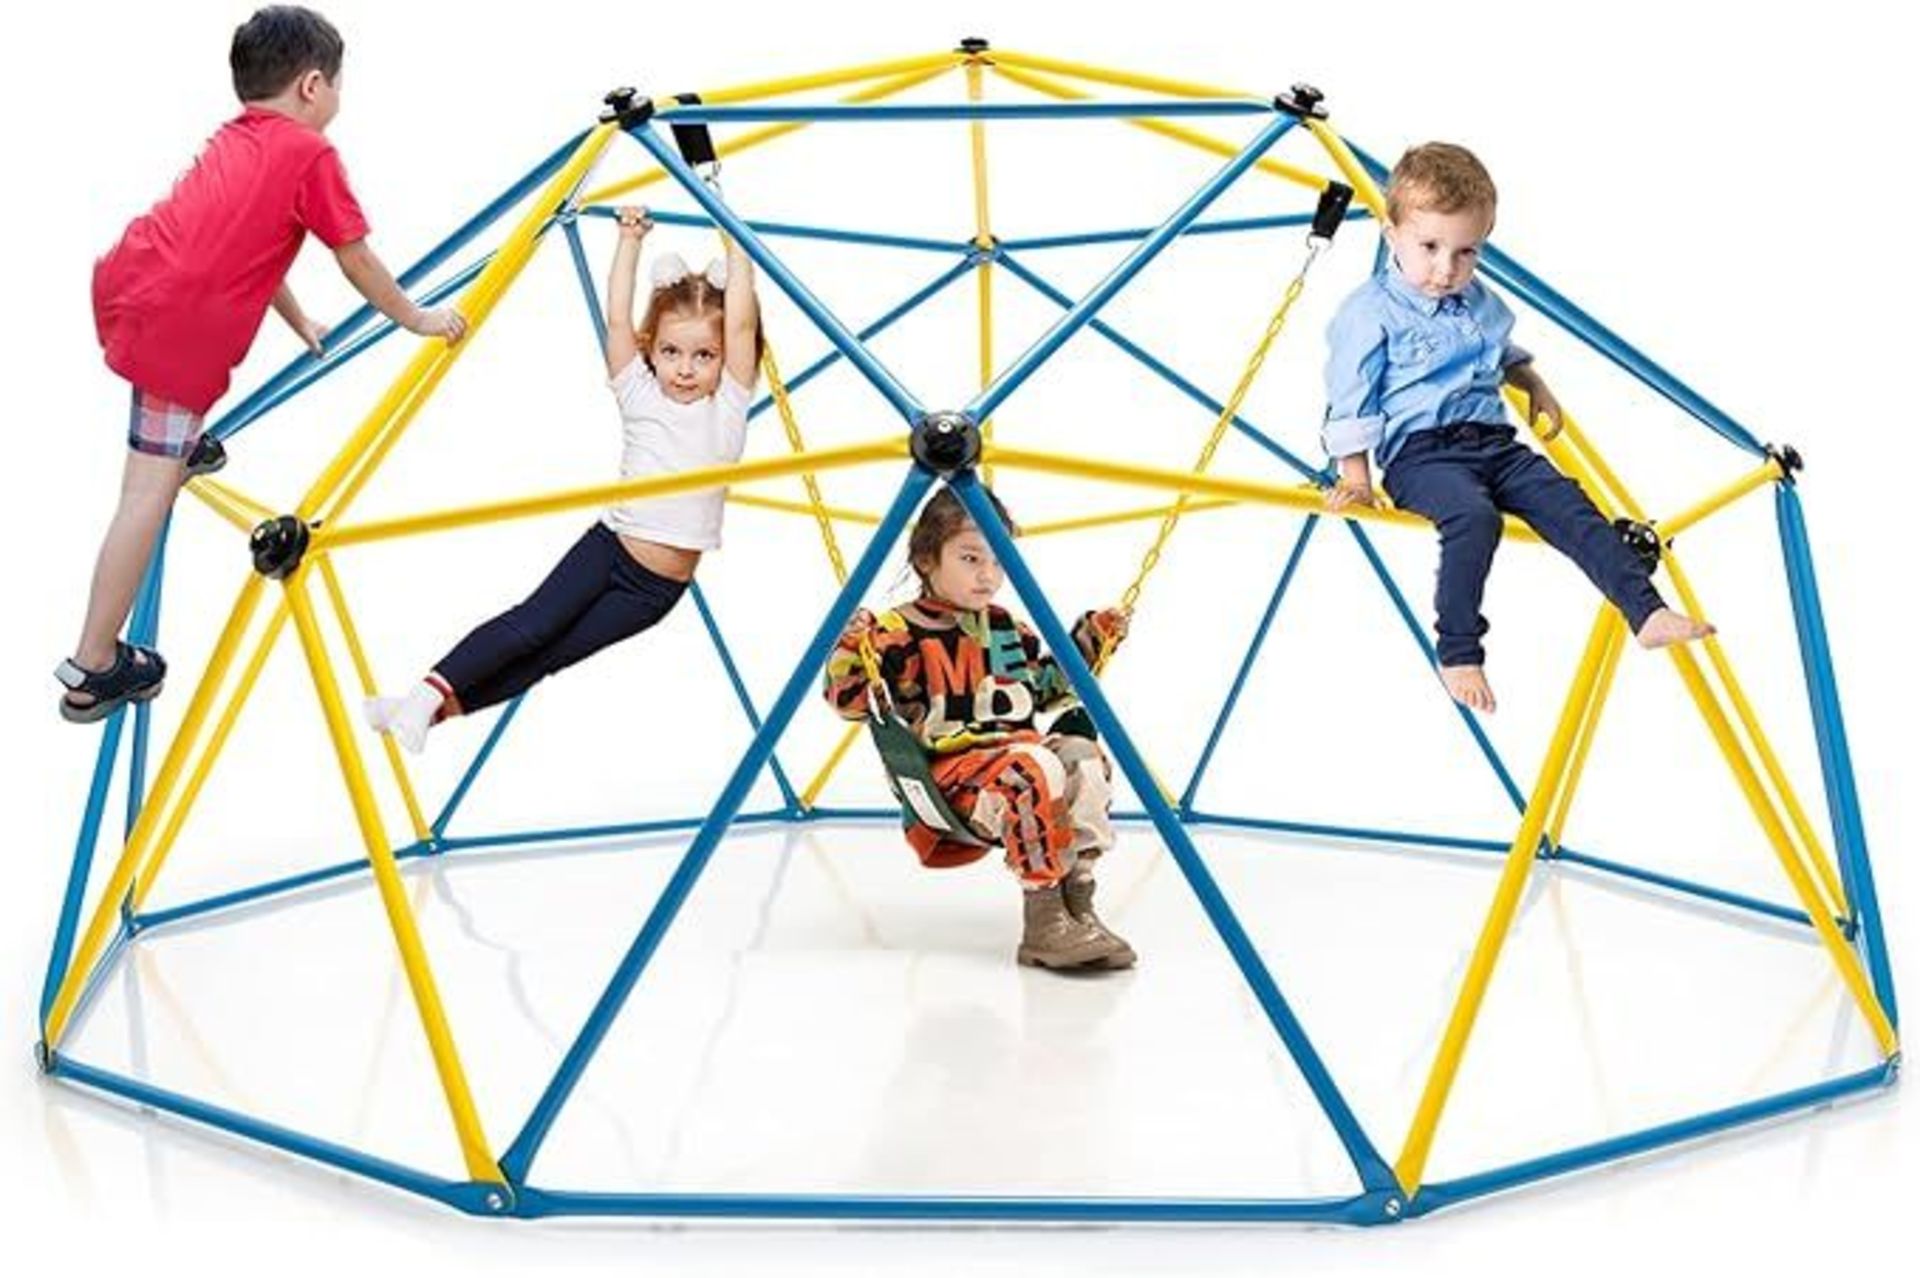 Costzon Climbing Dome with Swing, 10FT Outdoor Jungle Gym Monkey Bar Climbing Toys for Toddlers,